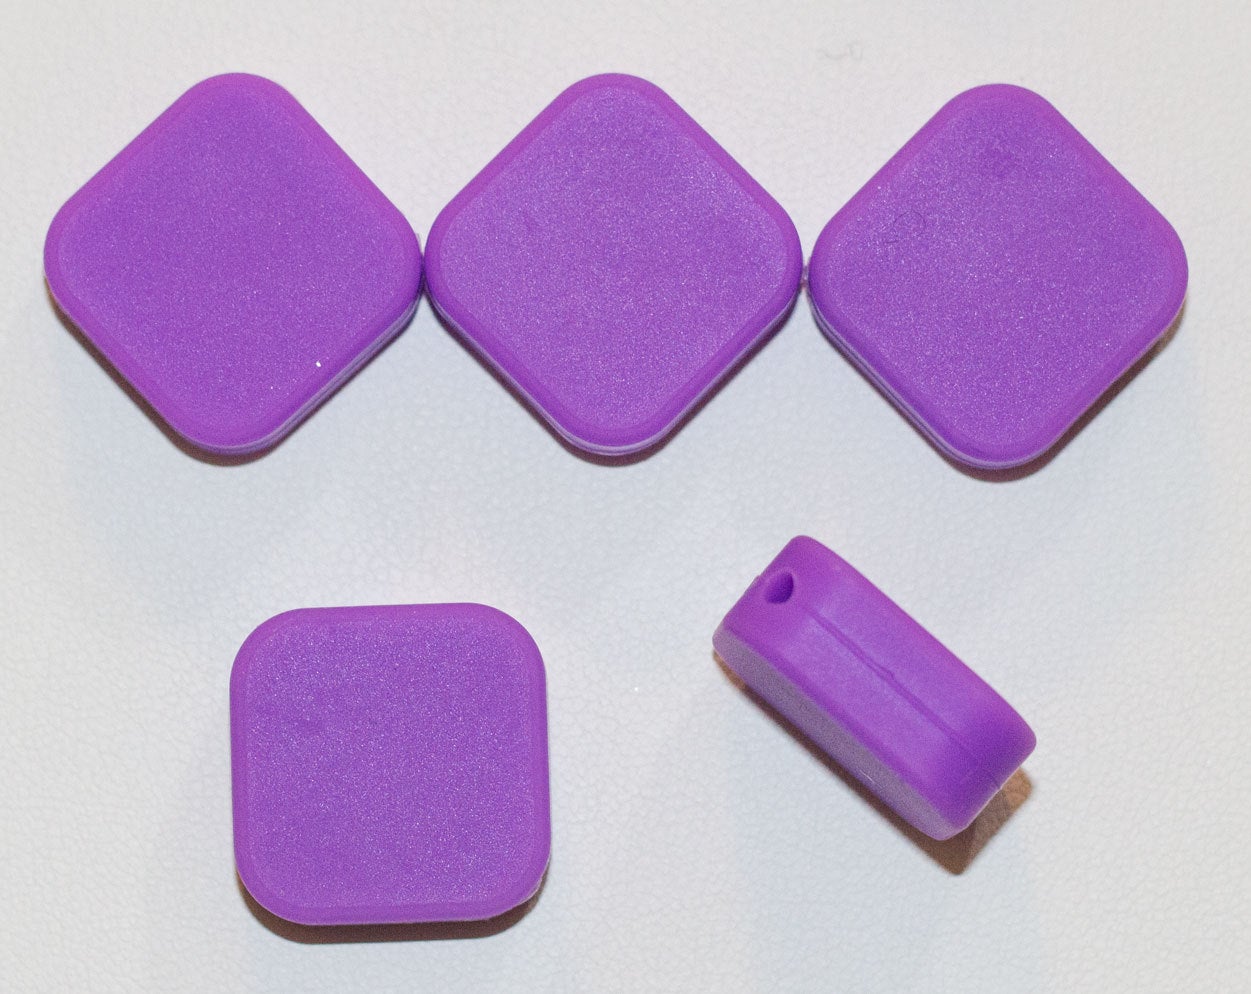 SALE - 1-5 Tile Silicone Beads in Grape - Square with Rounded Edges - 20 mm x 20 mm x 8 mm